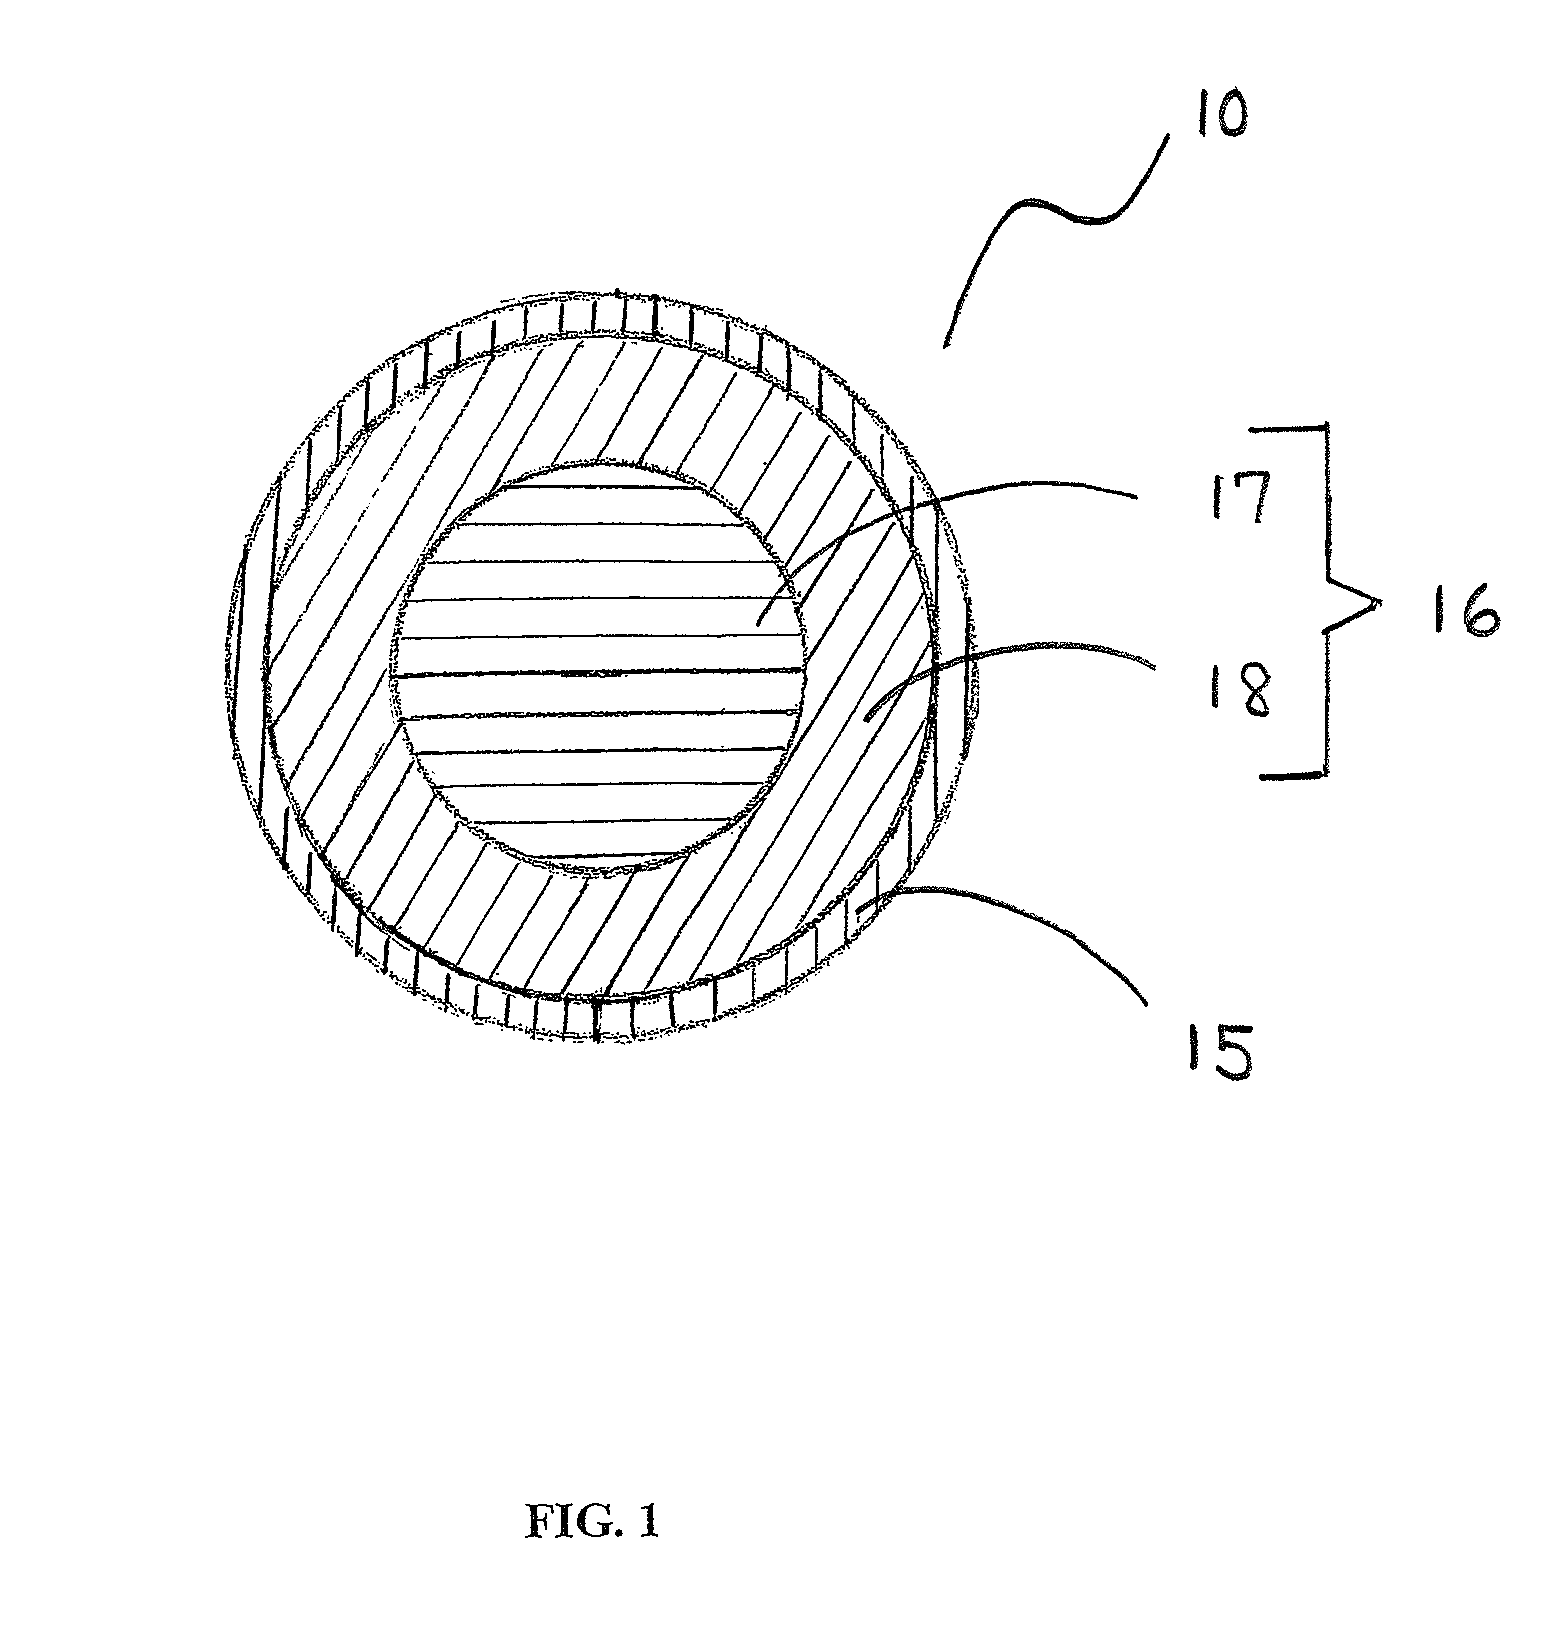 Multilayer core golf ball having hardness gradient within and between each core layer